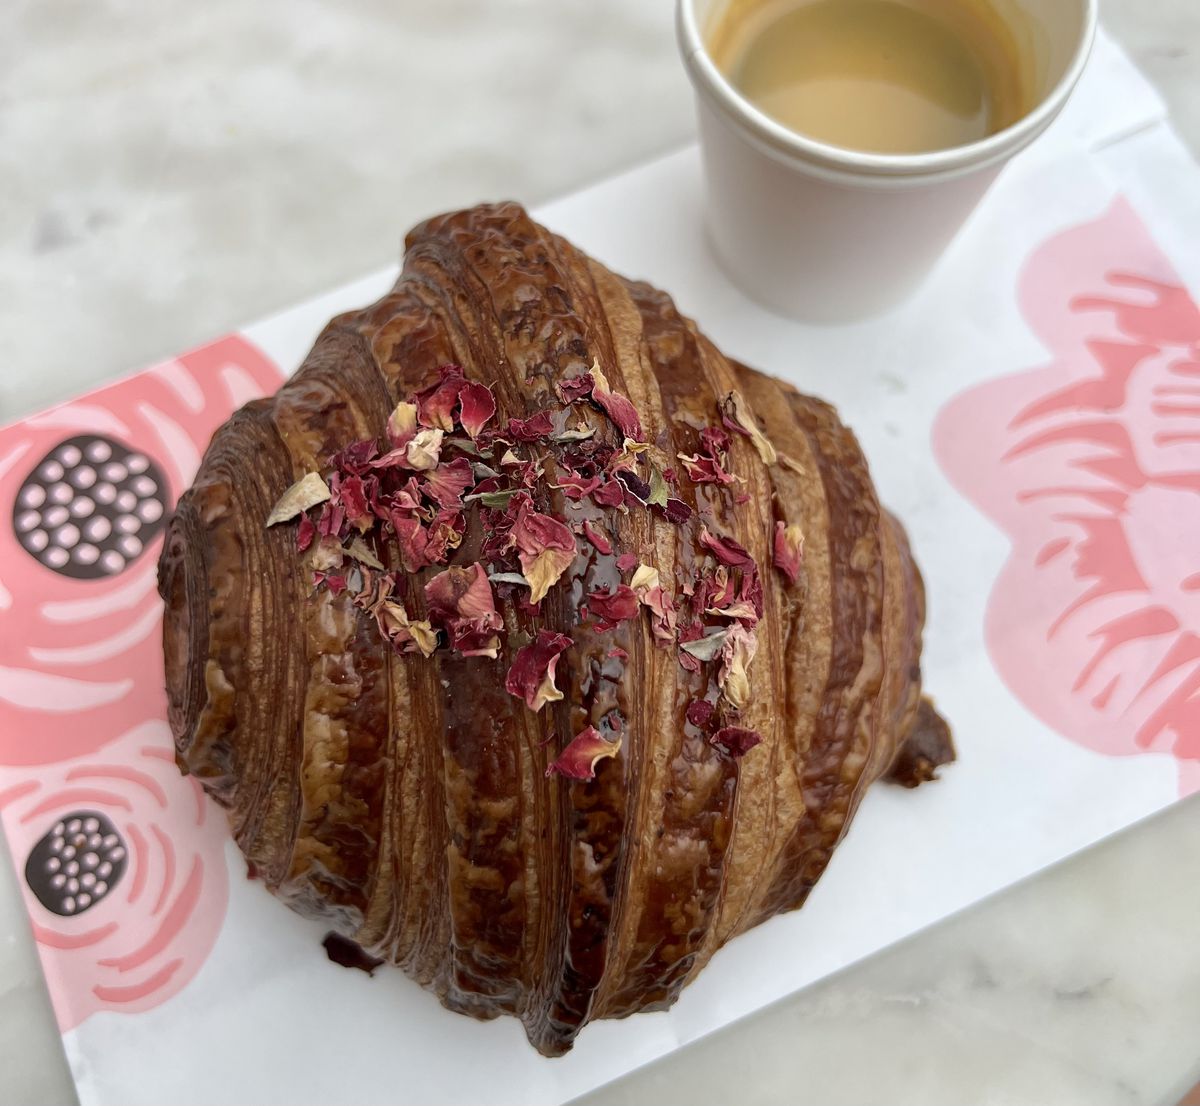 A croissant topped with dried rose petals on a rose patterned plate at Artelice Patisserie.